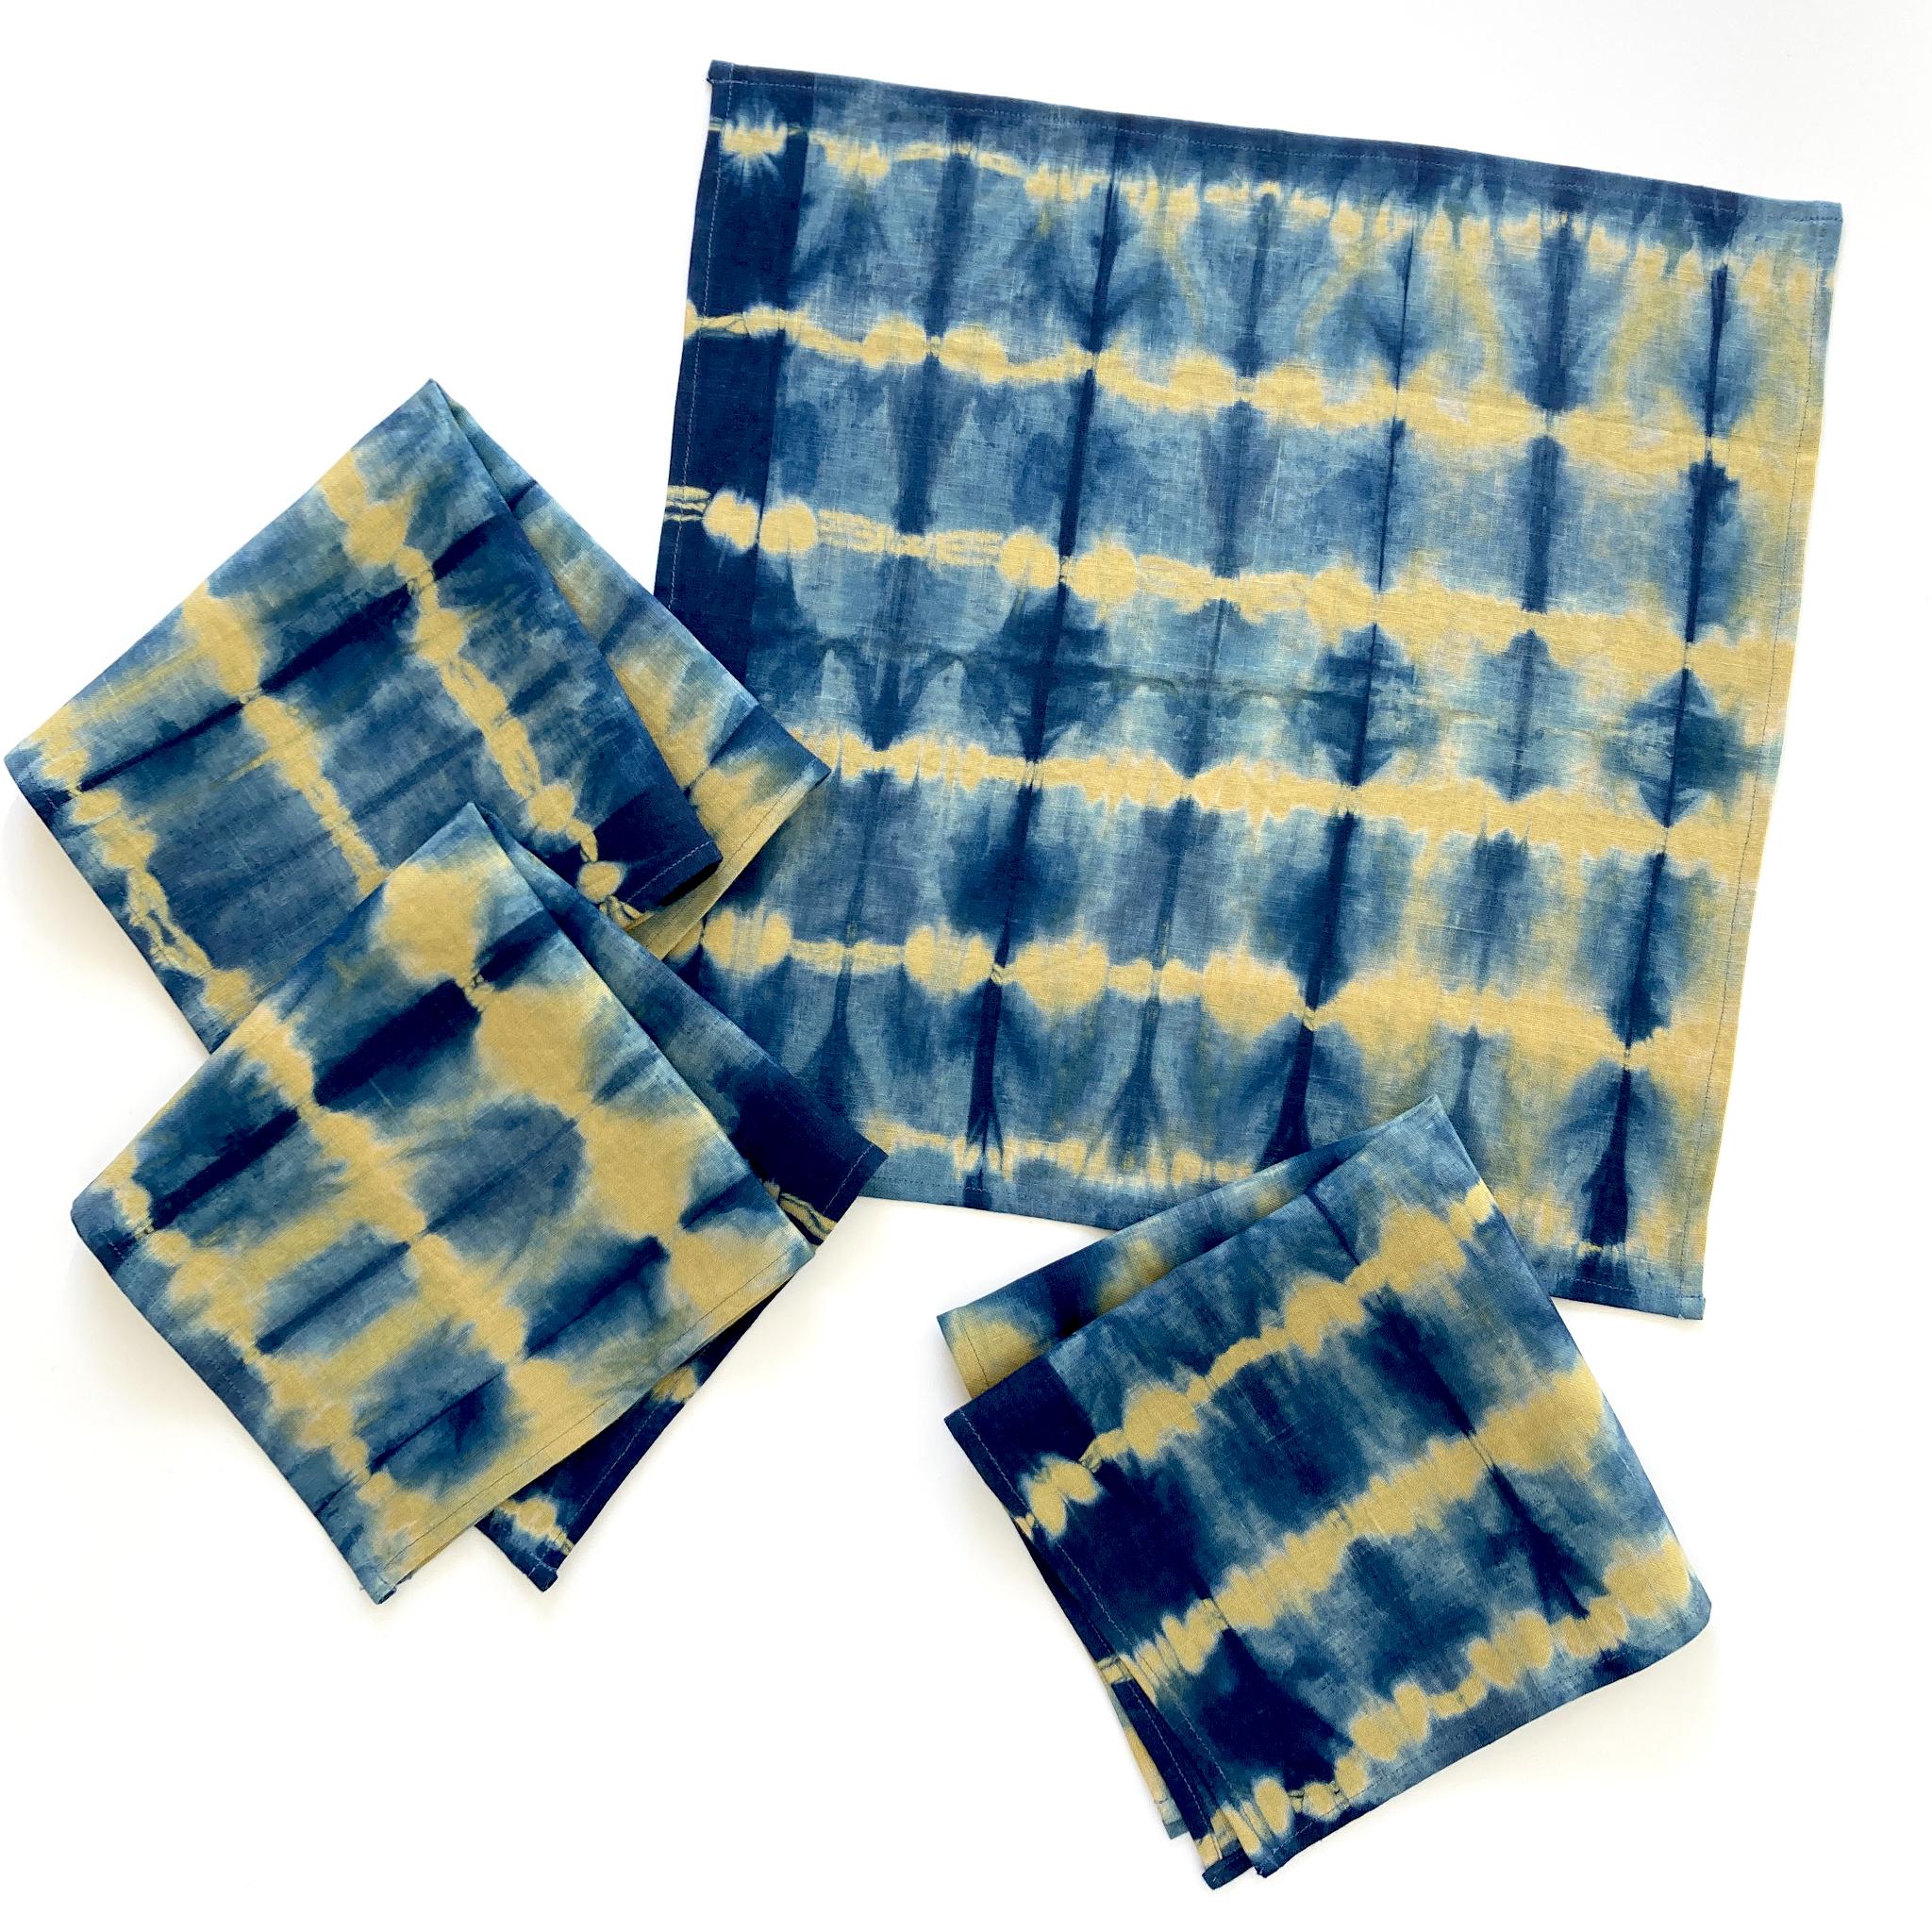 Gold linen napkins, set of four, dyed with indigo in Pleat pattern. Hand-dyed and sewn in New York City. Napkins measure approximately 18 x 18 inches. Each linen napkin is hand dyed and one of a kind. 

Each linen panel is cut and folded by hand, in